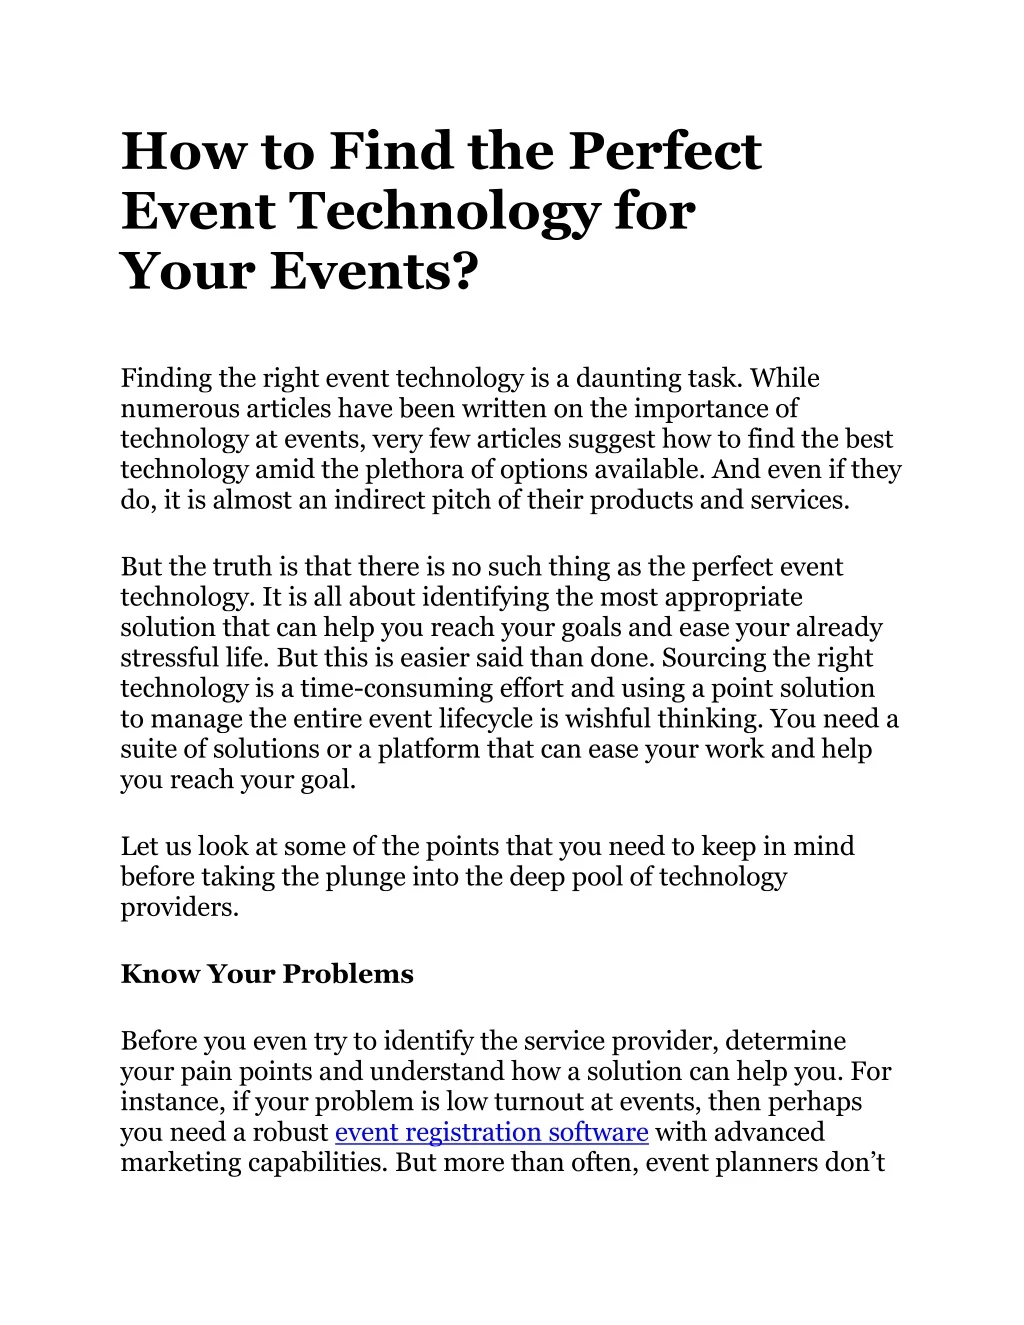 how to find the perfect event technology for your